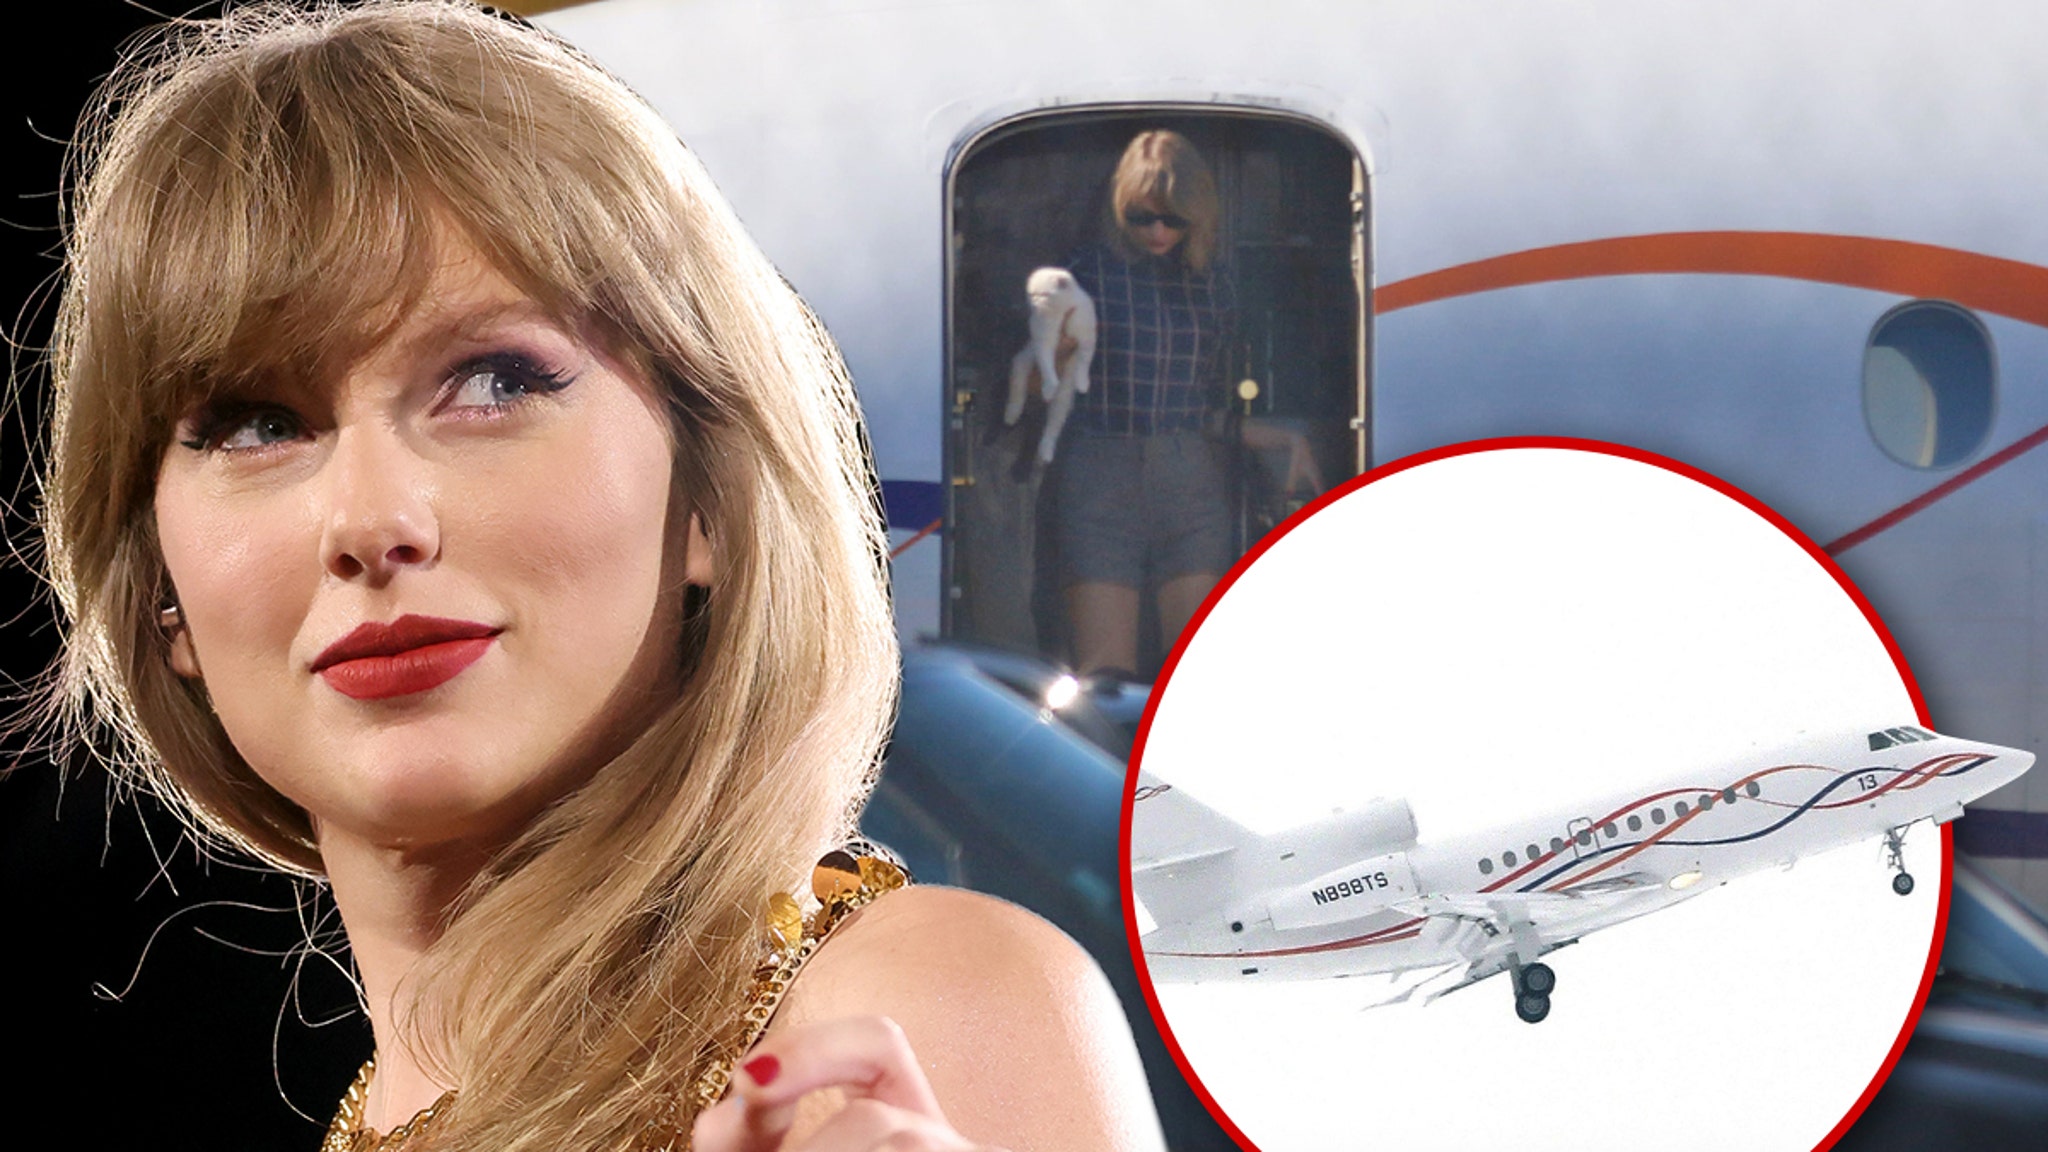 “Taylor Swift’s Private Jet Sold to CarShield-Linked Owner”